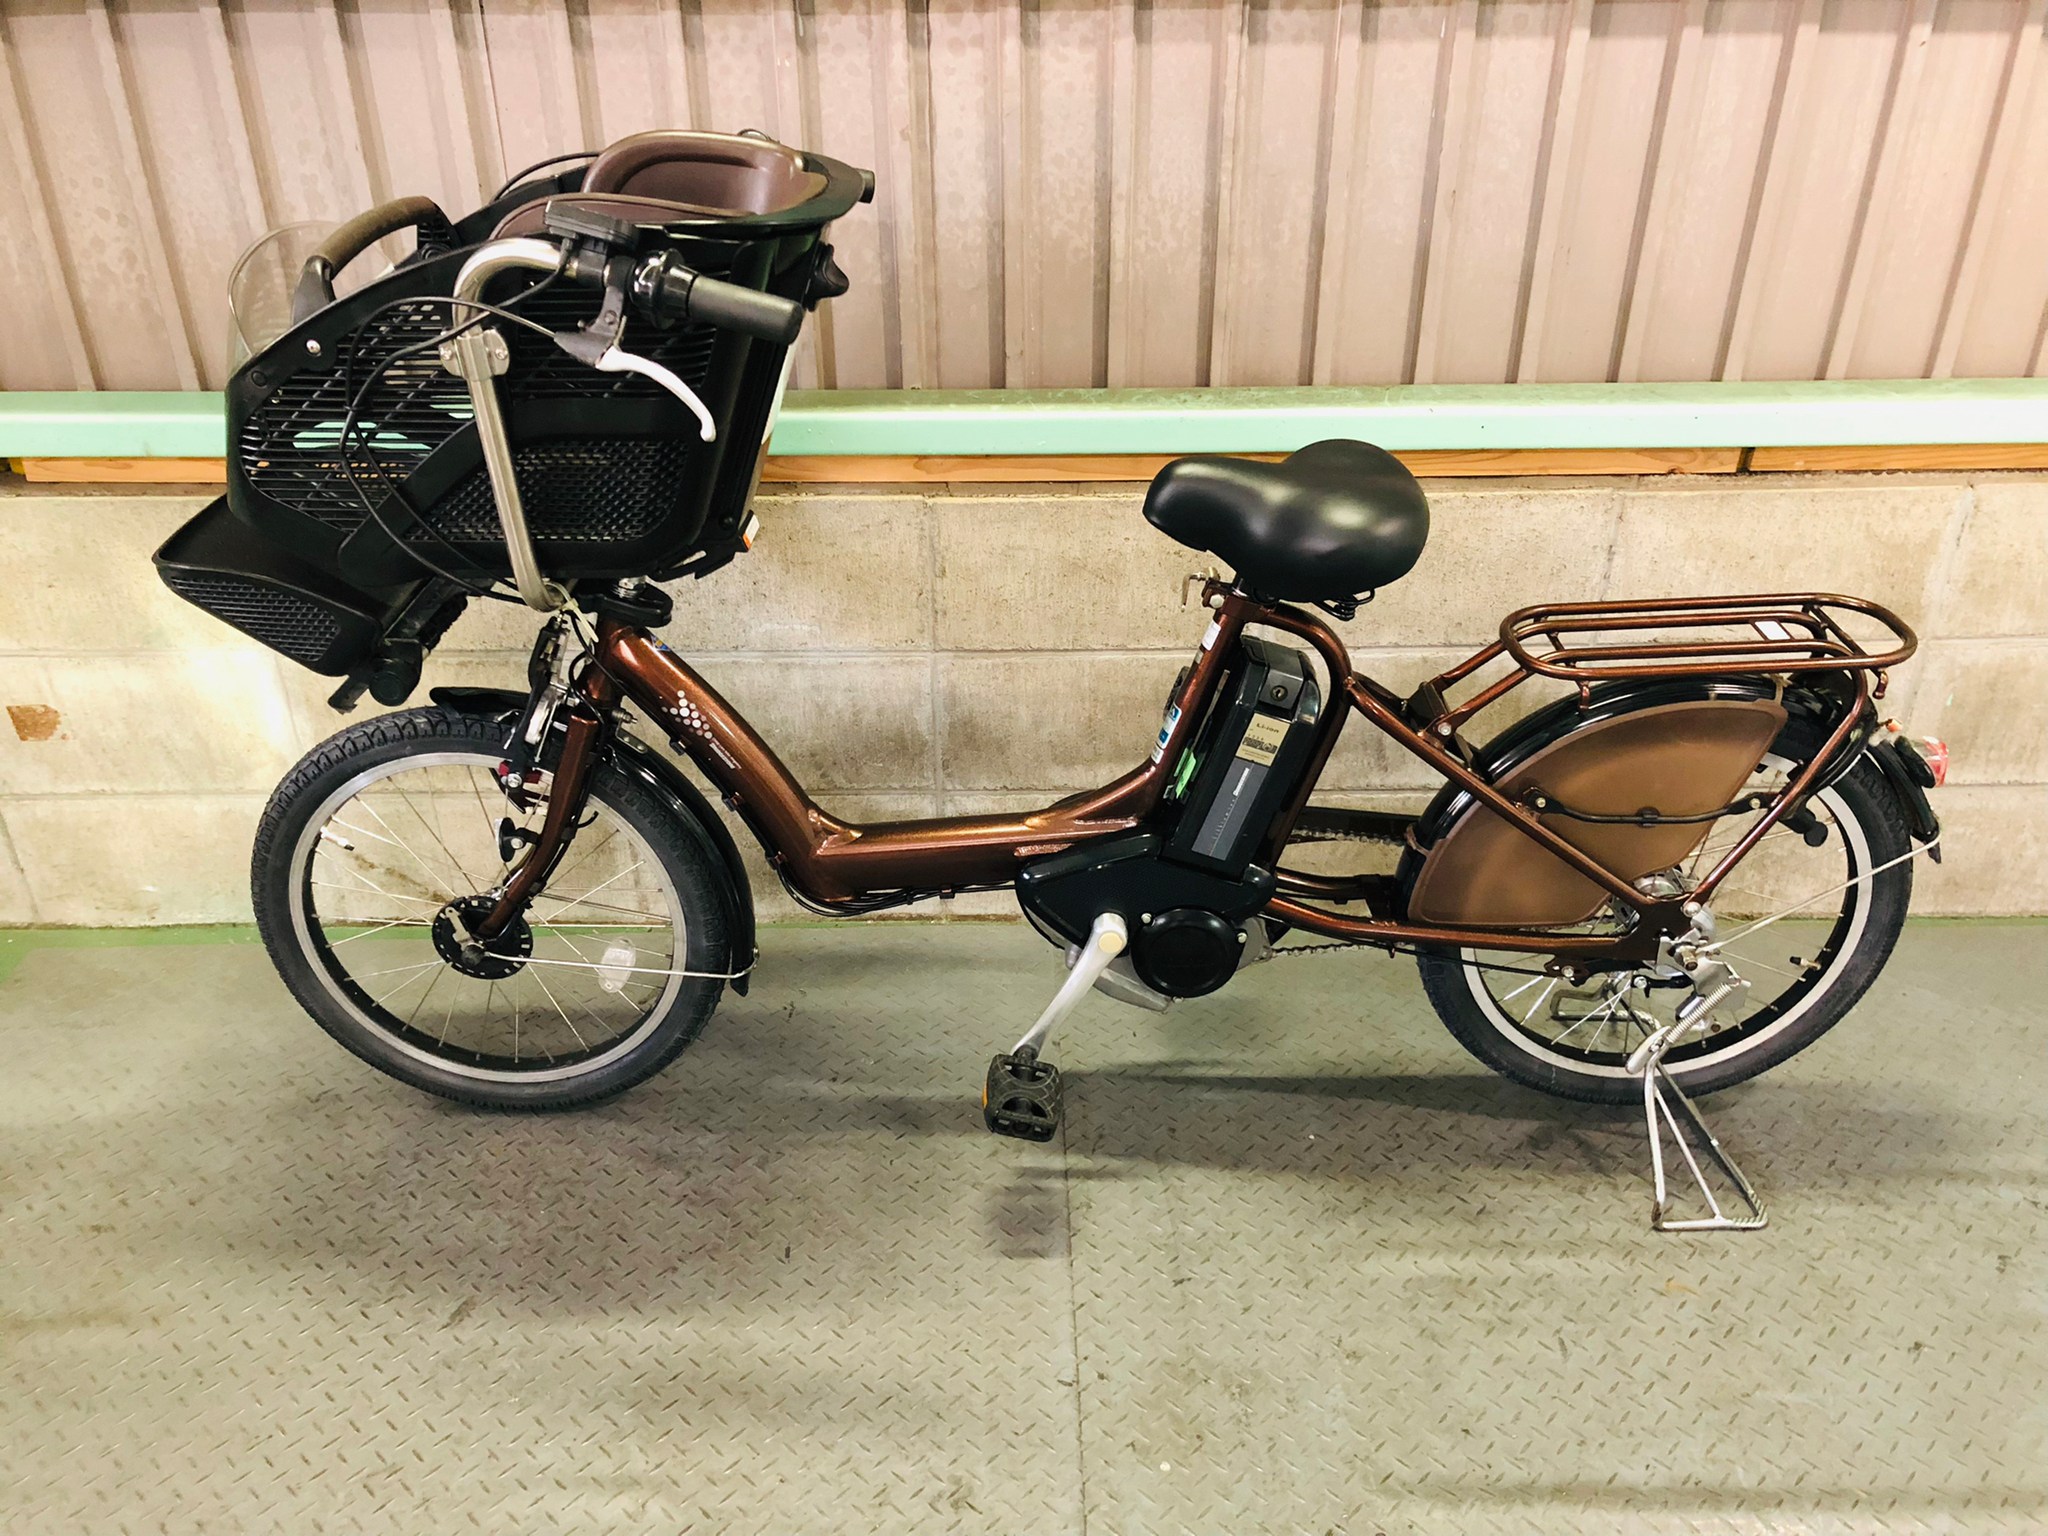 【SOLD OUT】電動自転車 ブリヂストン アンジェリーノ 20インチ 8.1ah 前子供乗せ | 国産・中古の激安電動アシスト自転車を販売